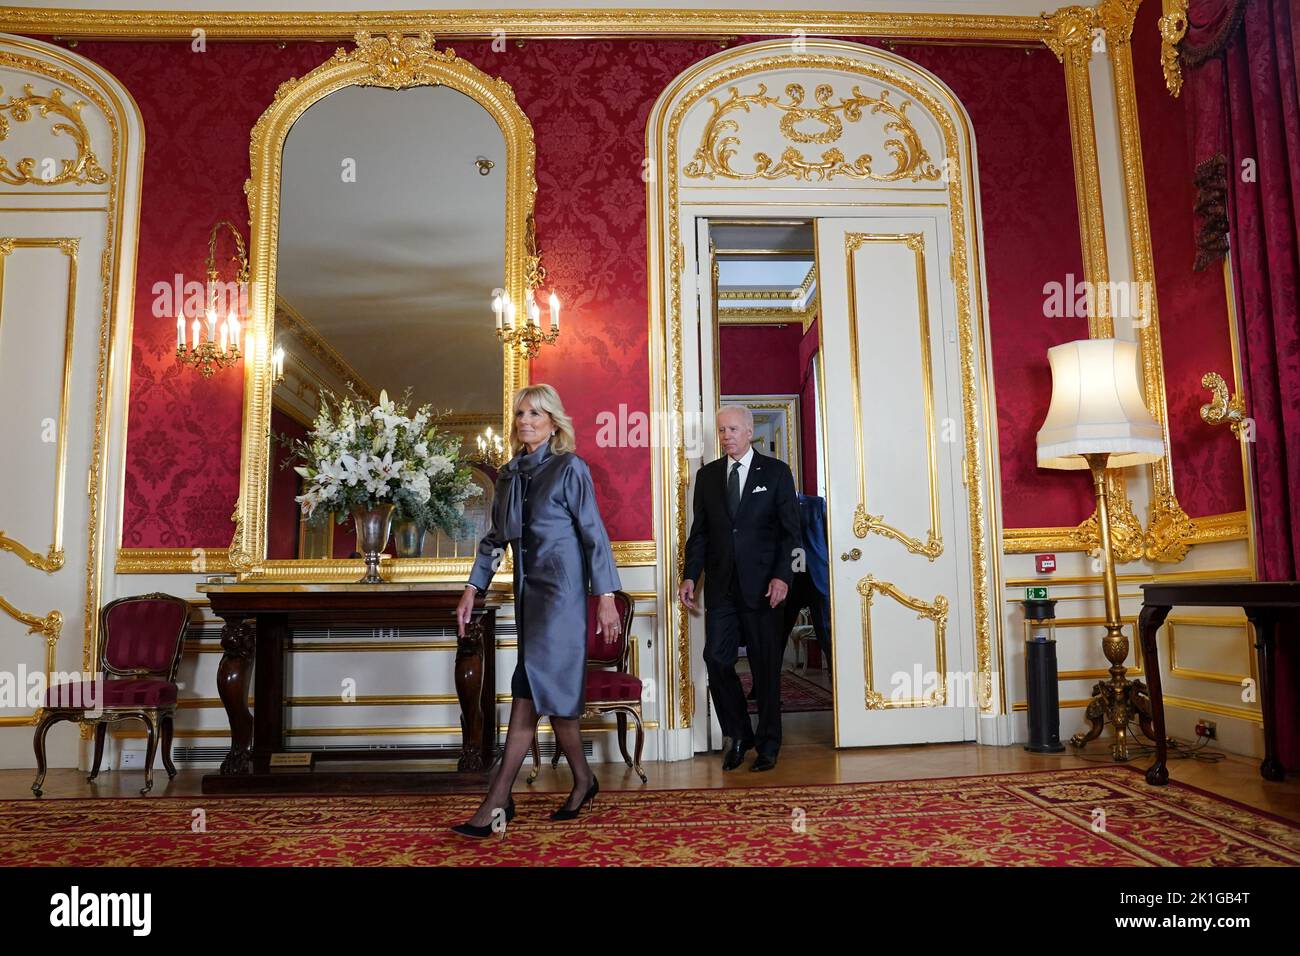 U.S. President Joe Biden and first lady Jill Biden attend to sign a condolence book for Britain's Queen Elizabeth, following her death, at Lancaster House in London, Britain, September 18, 2022. REUTERS/Kevin Lamarque Stock Photo